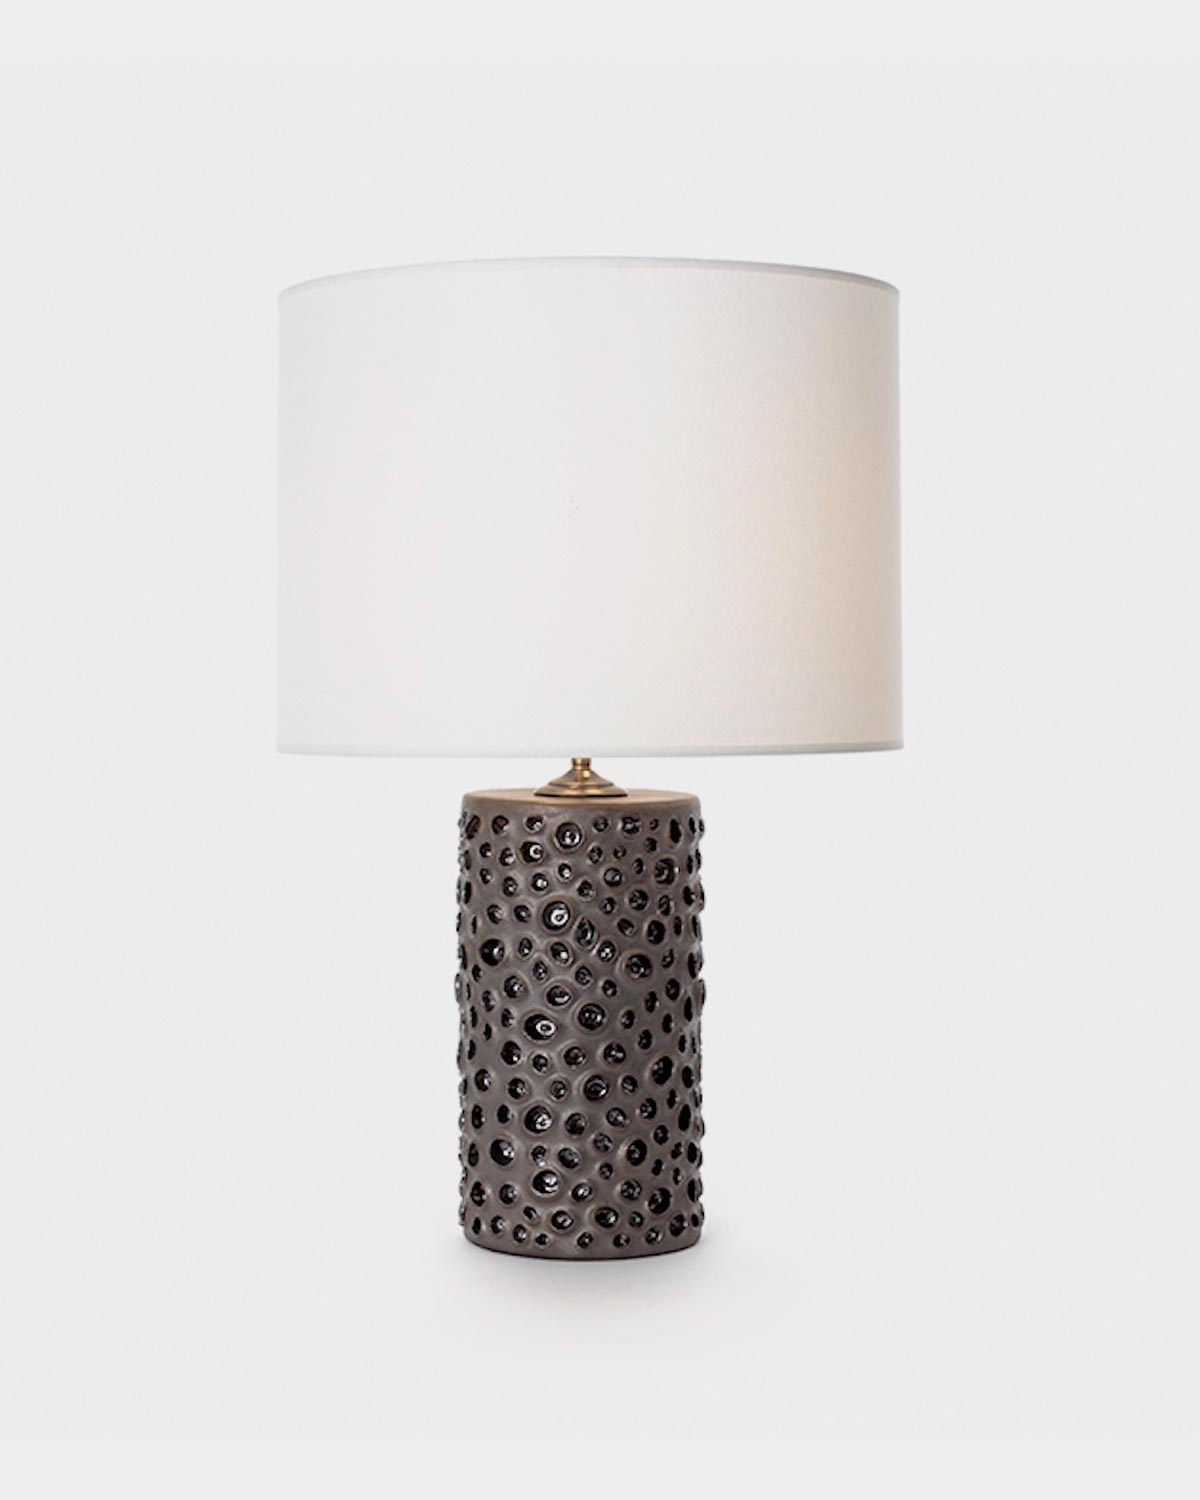 The Arsi Table Lamp by Pamela Sunday